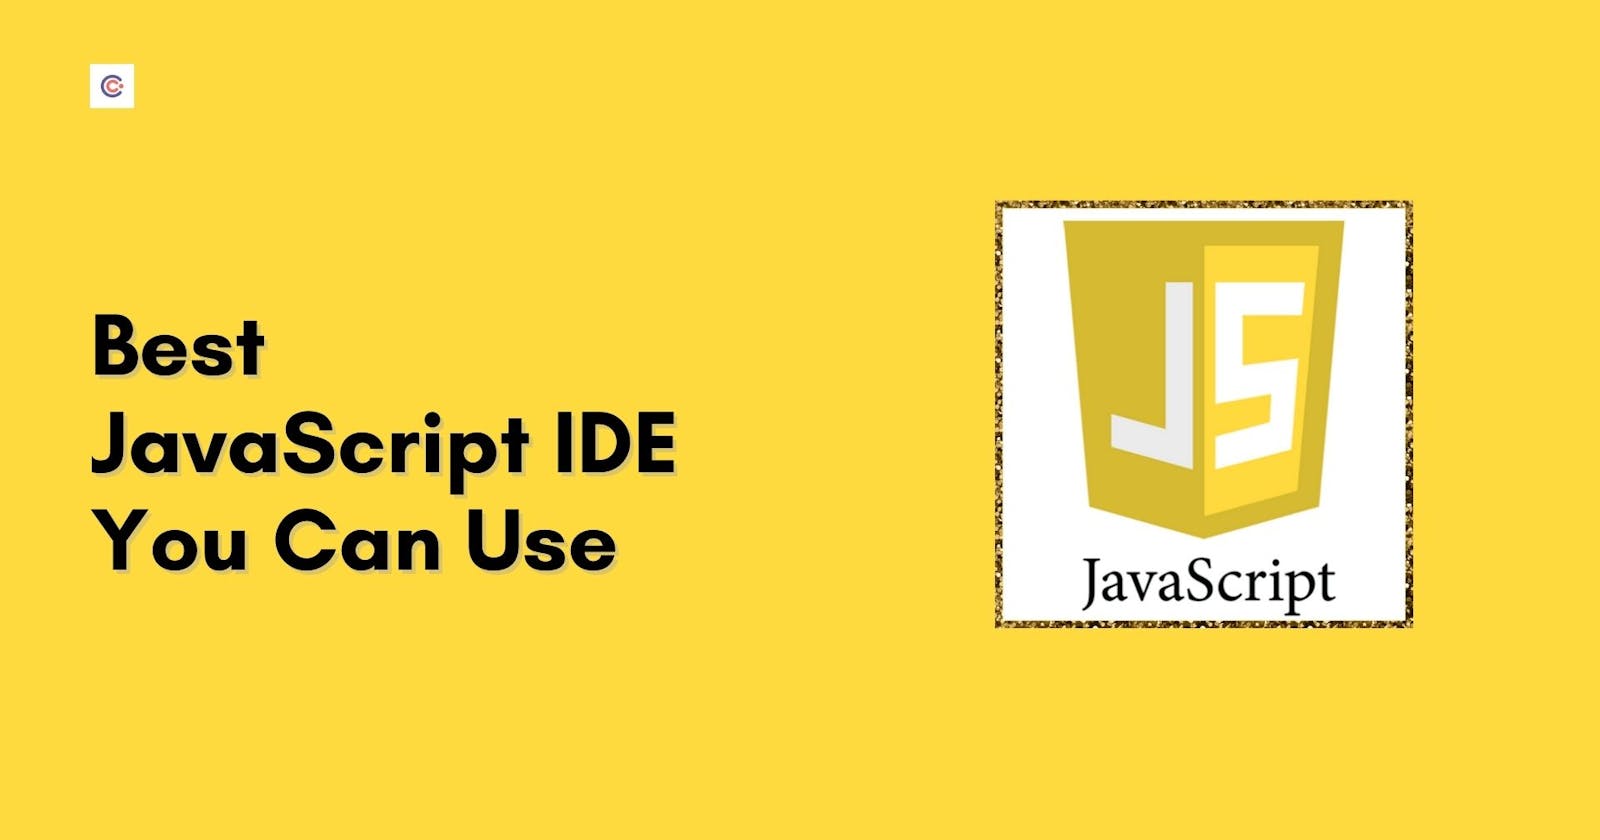 9 Best JavaScript IDEs and Code Editors To Use In 2021